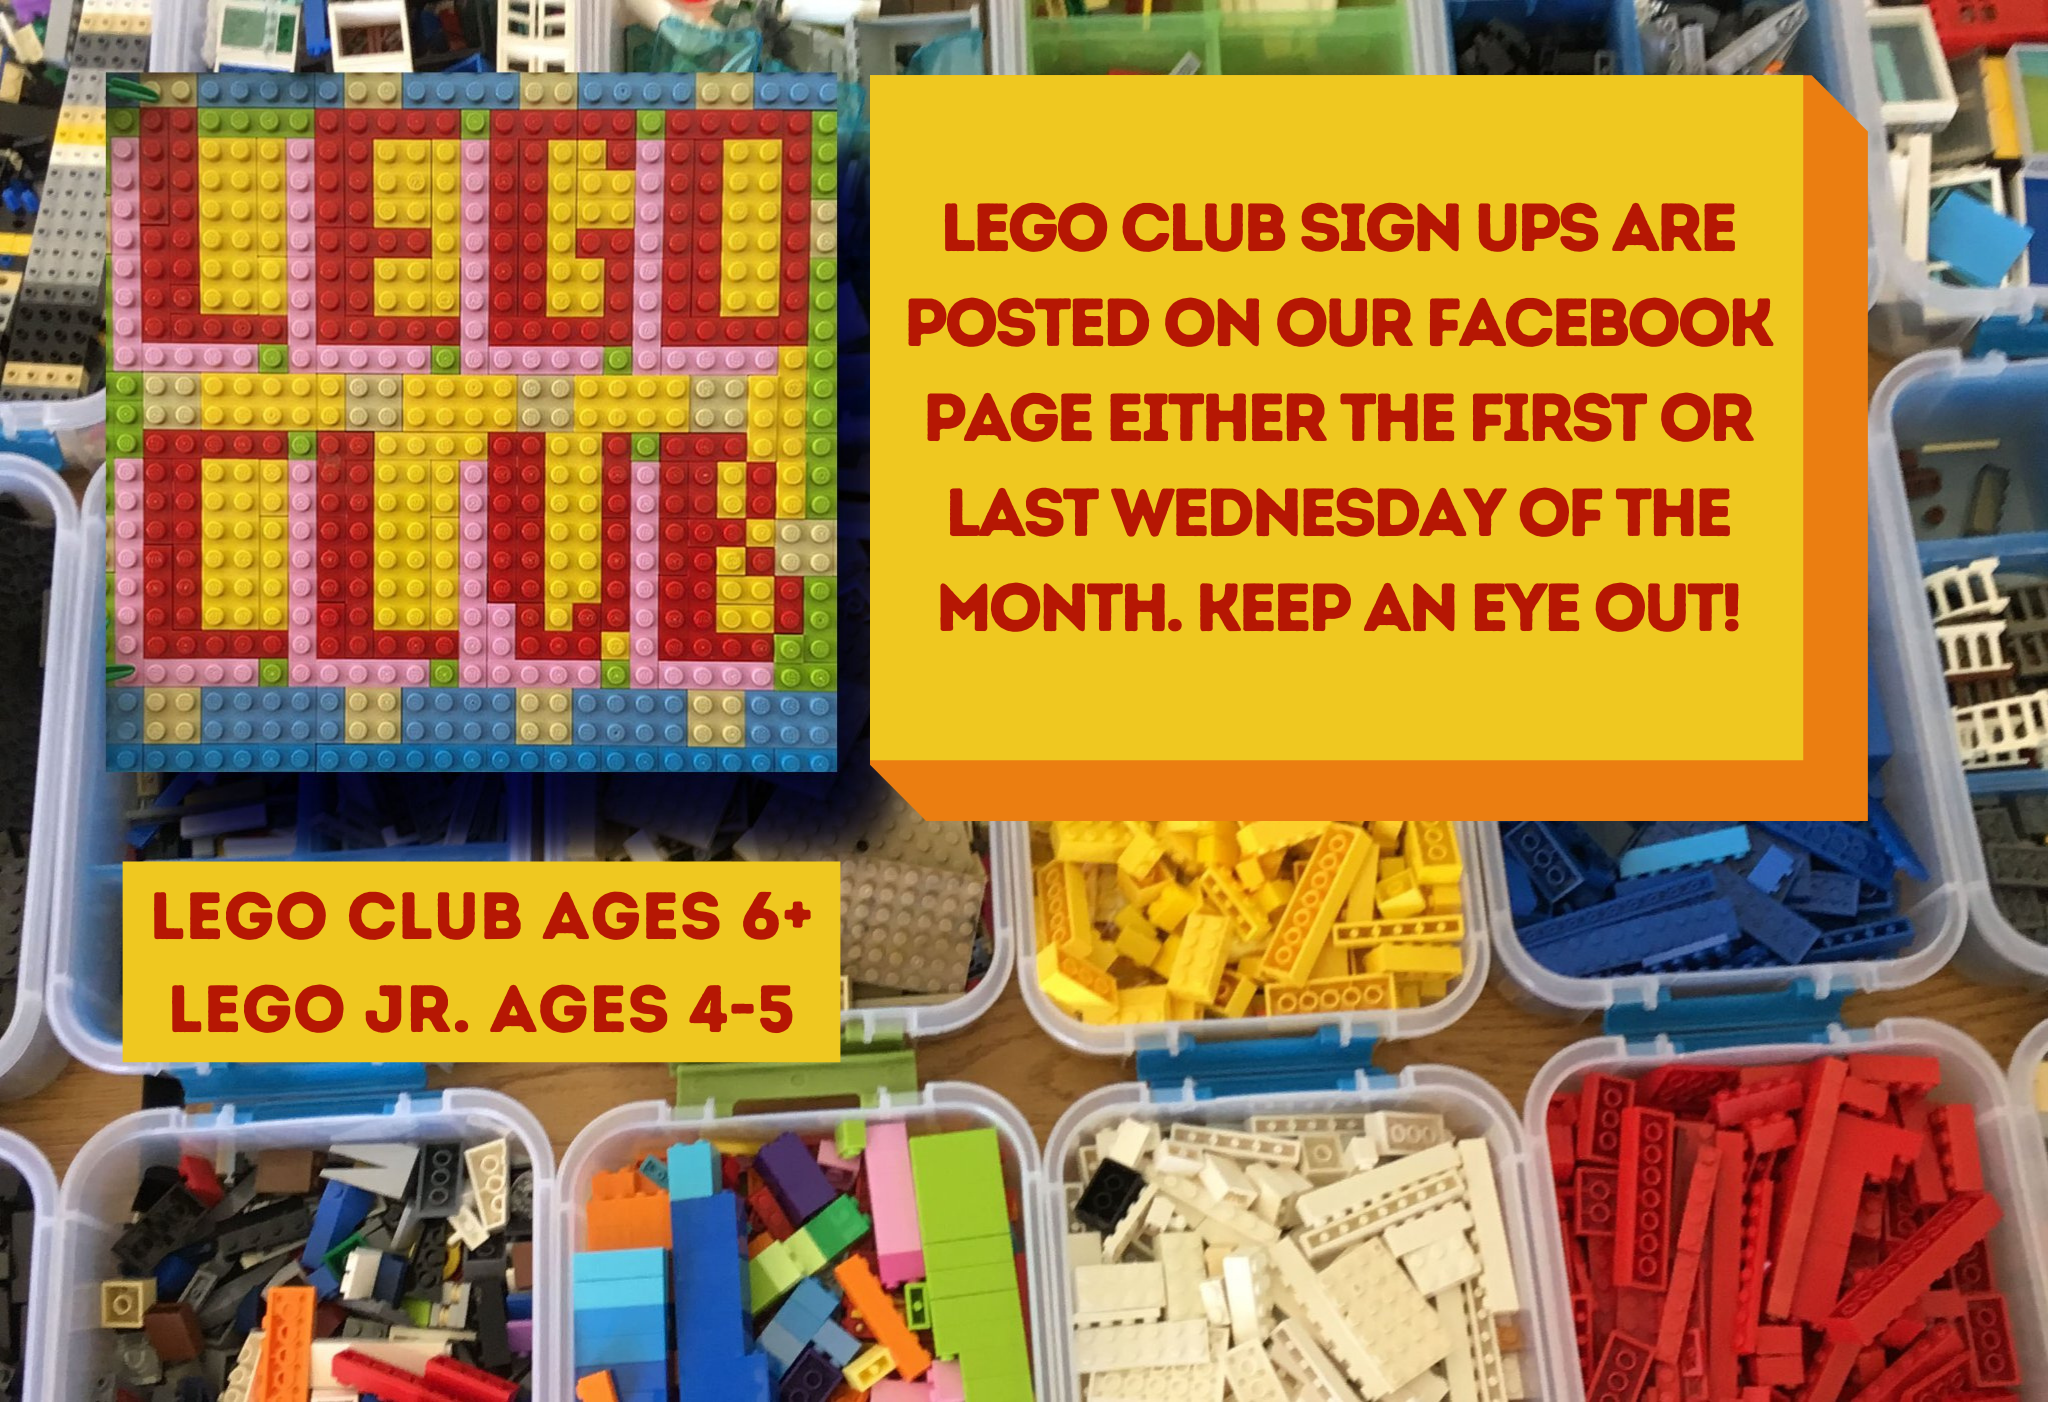 Lego Club sign ups are posted on our facebook either the first or the last Wednesday of the month. Keep an eye out! Lego club ages 6+, Lego junior ages 4-5